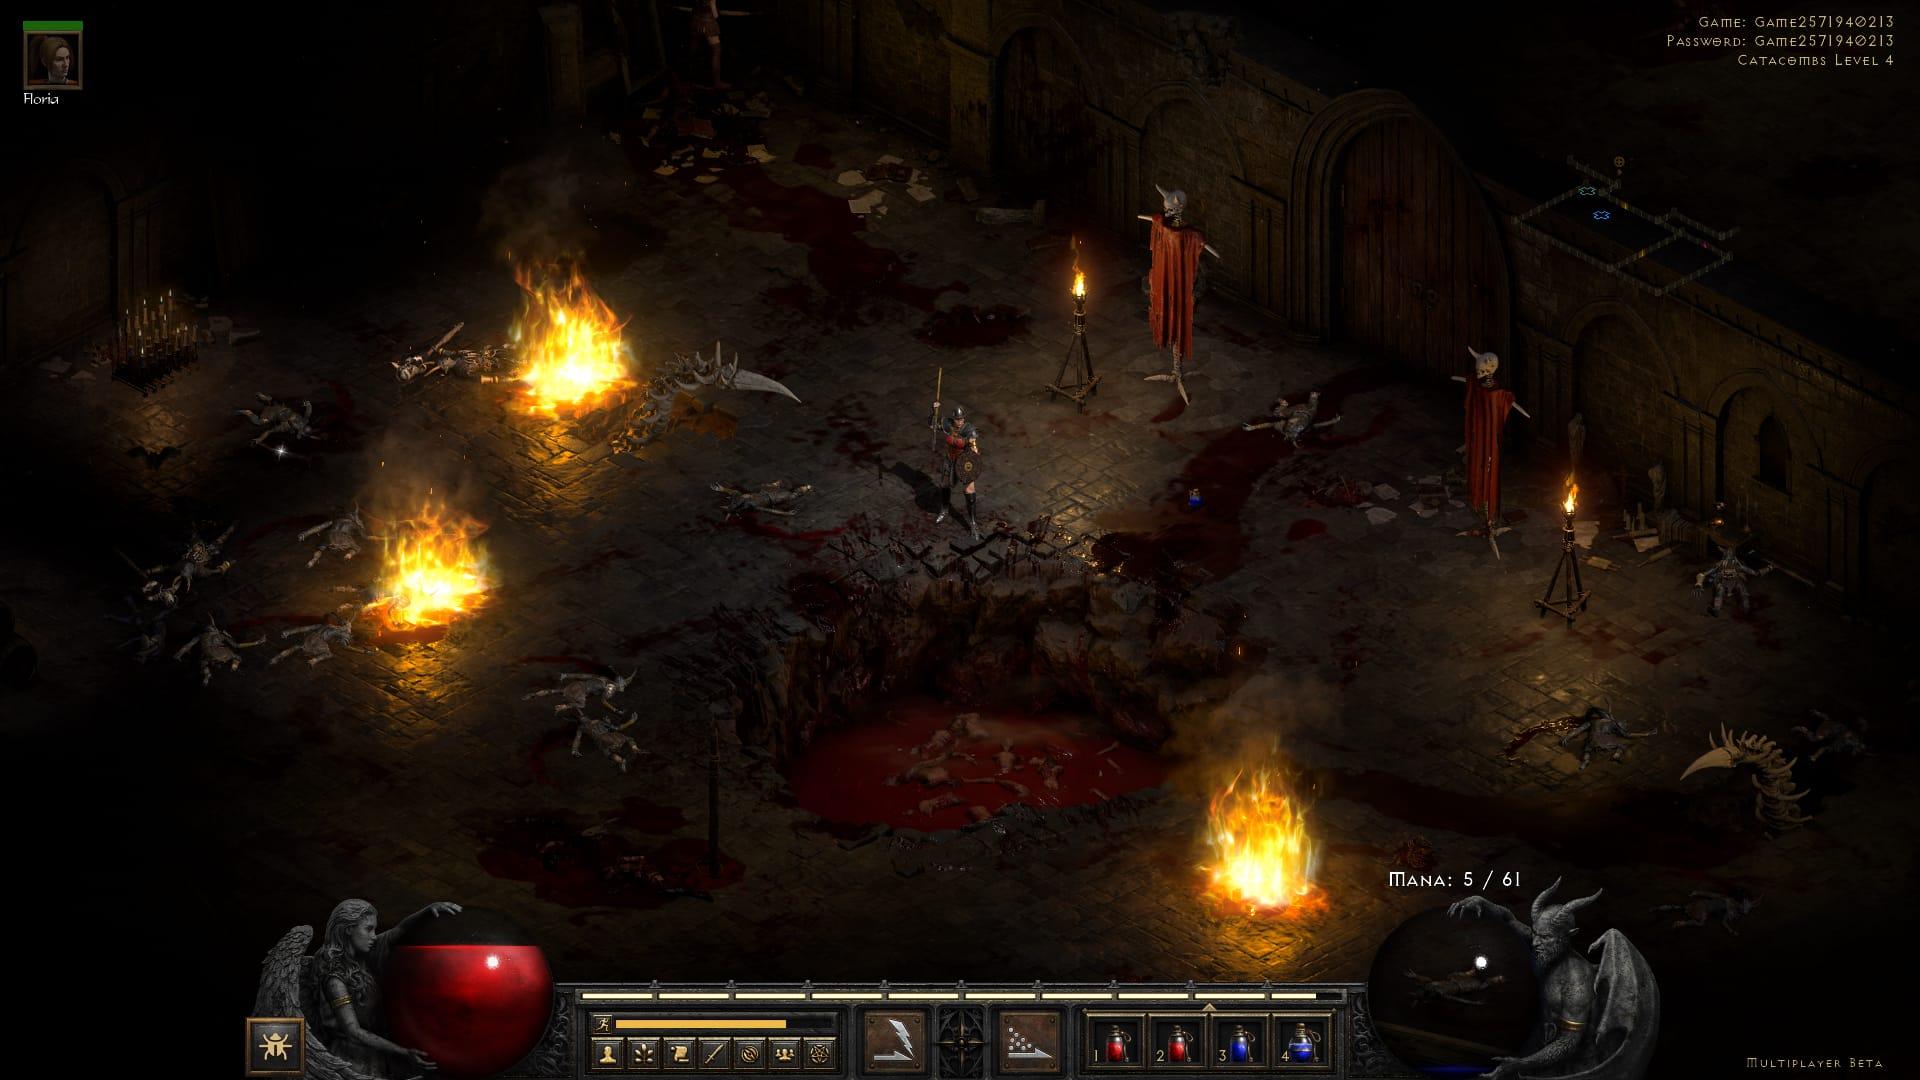 Diablo 2 resurrected character stands in a dungeon with pools of blood and skulls mounted on sticks